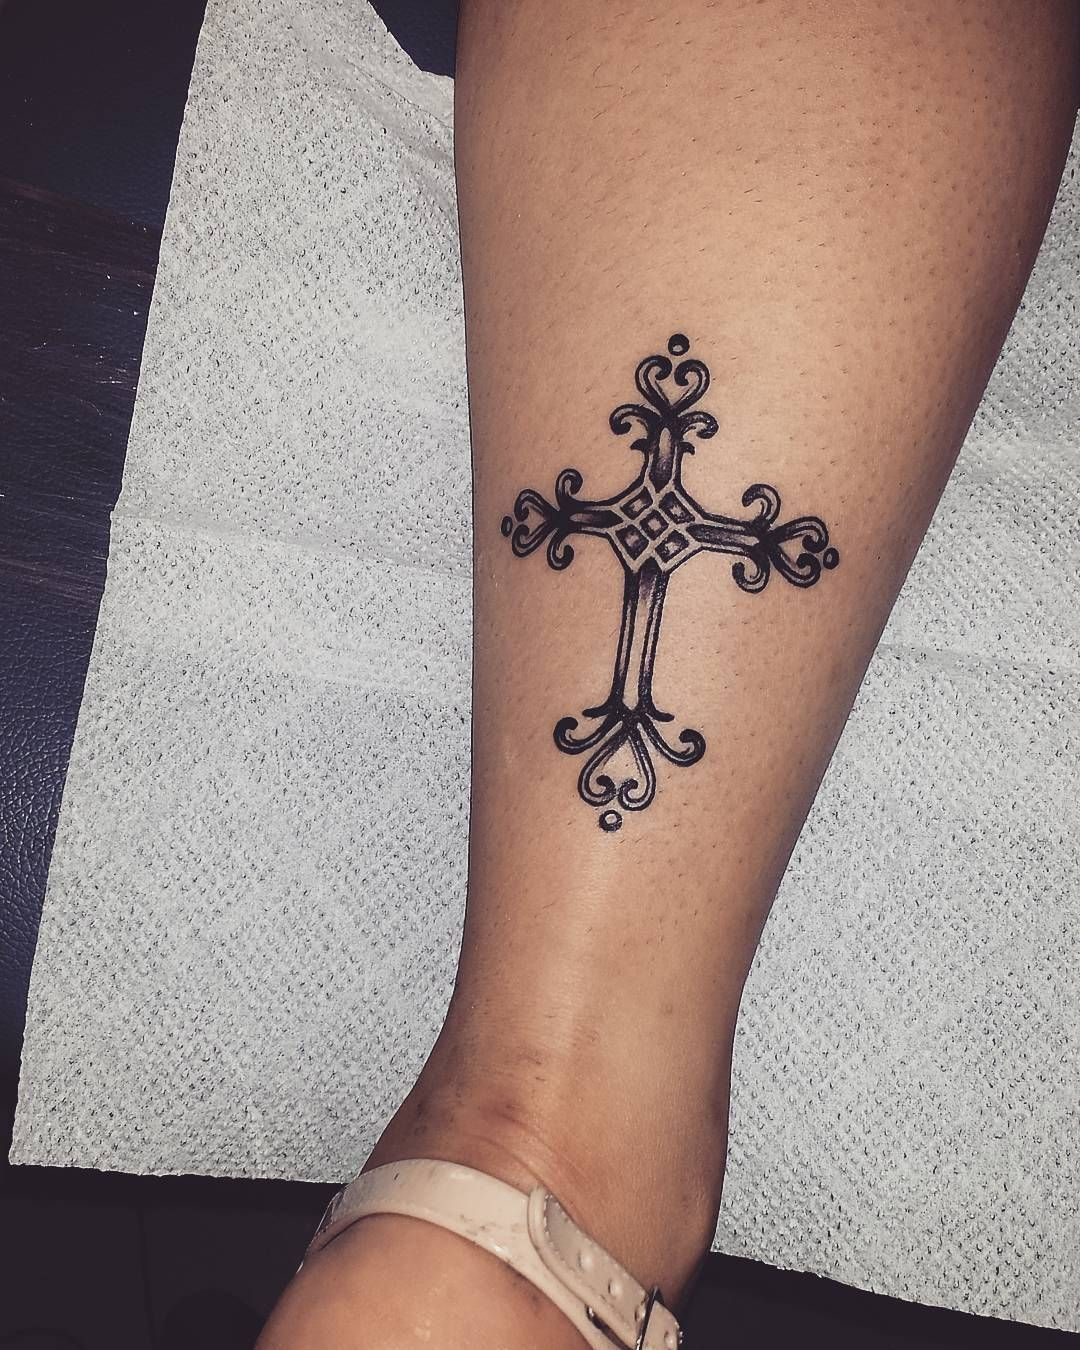 25 Unique Small Cross Tattoo Designs Simple And Lovely Yet regarding dimensions 1080 X 1350